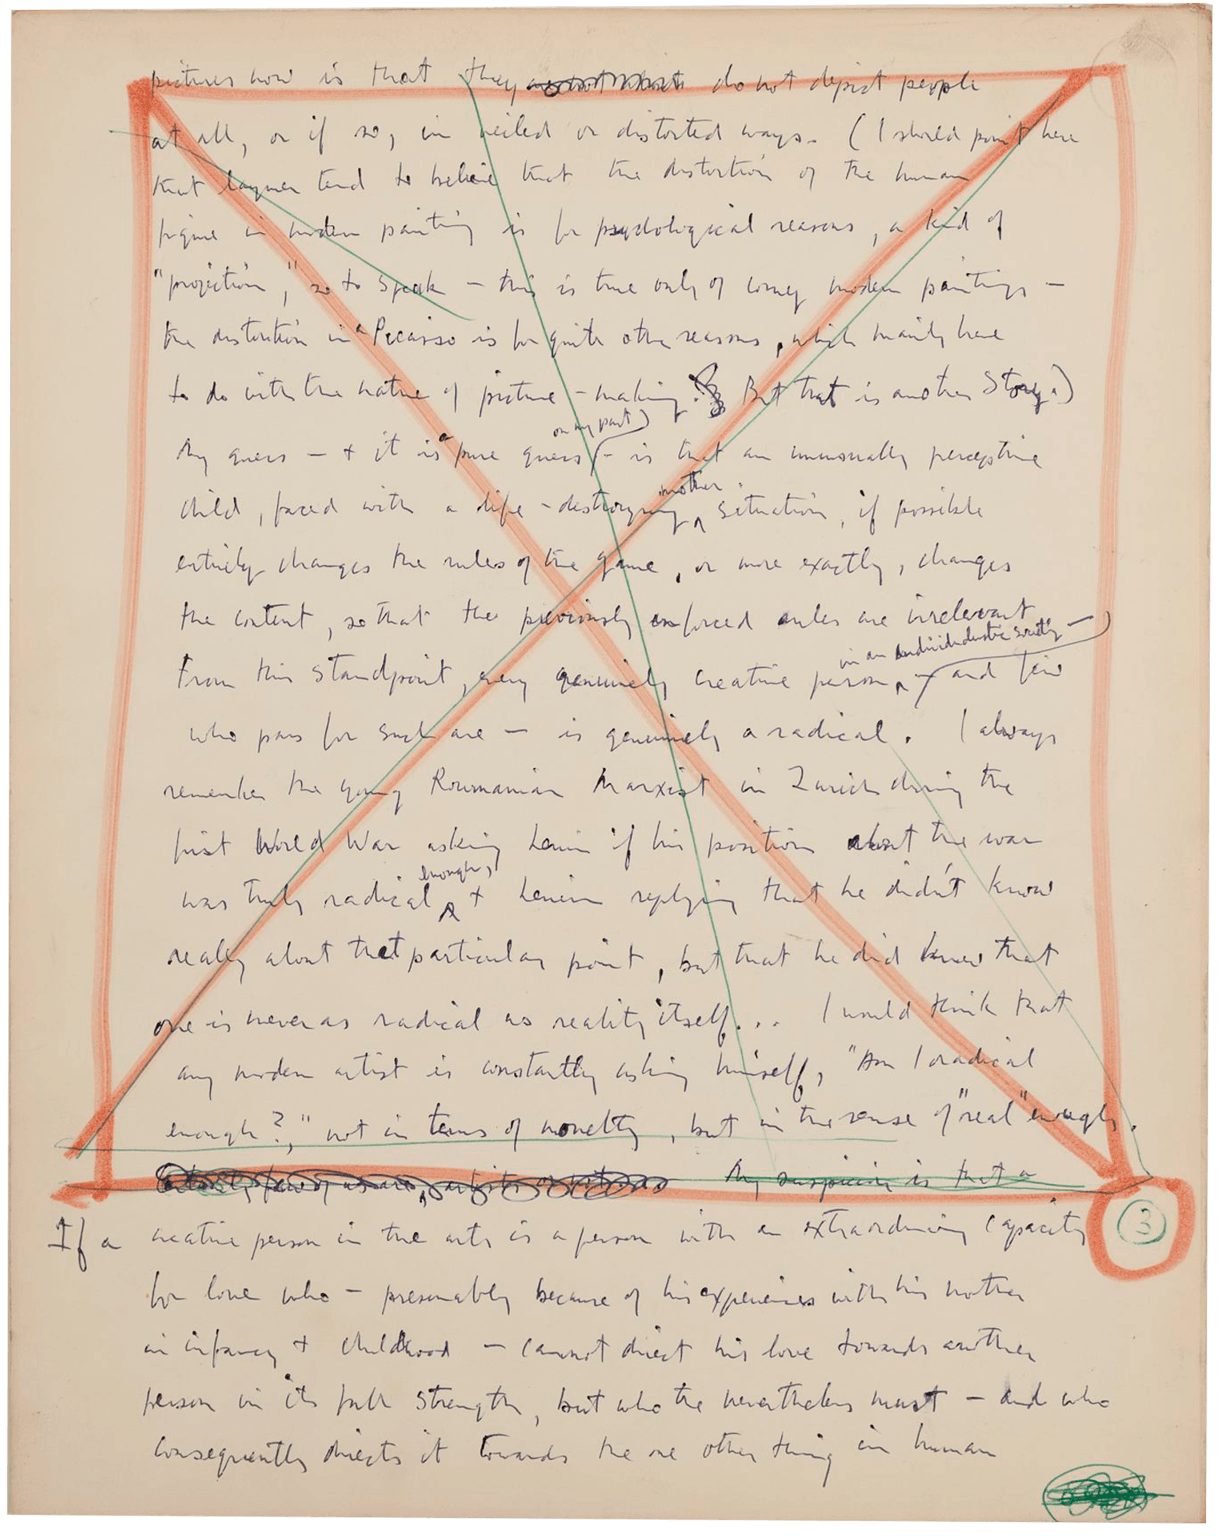 A page from Motherwell's draft of "A Process of Painting", 1963